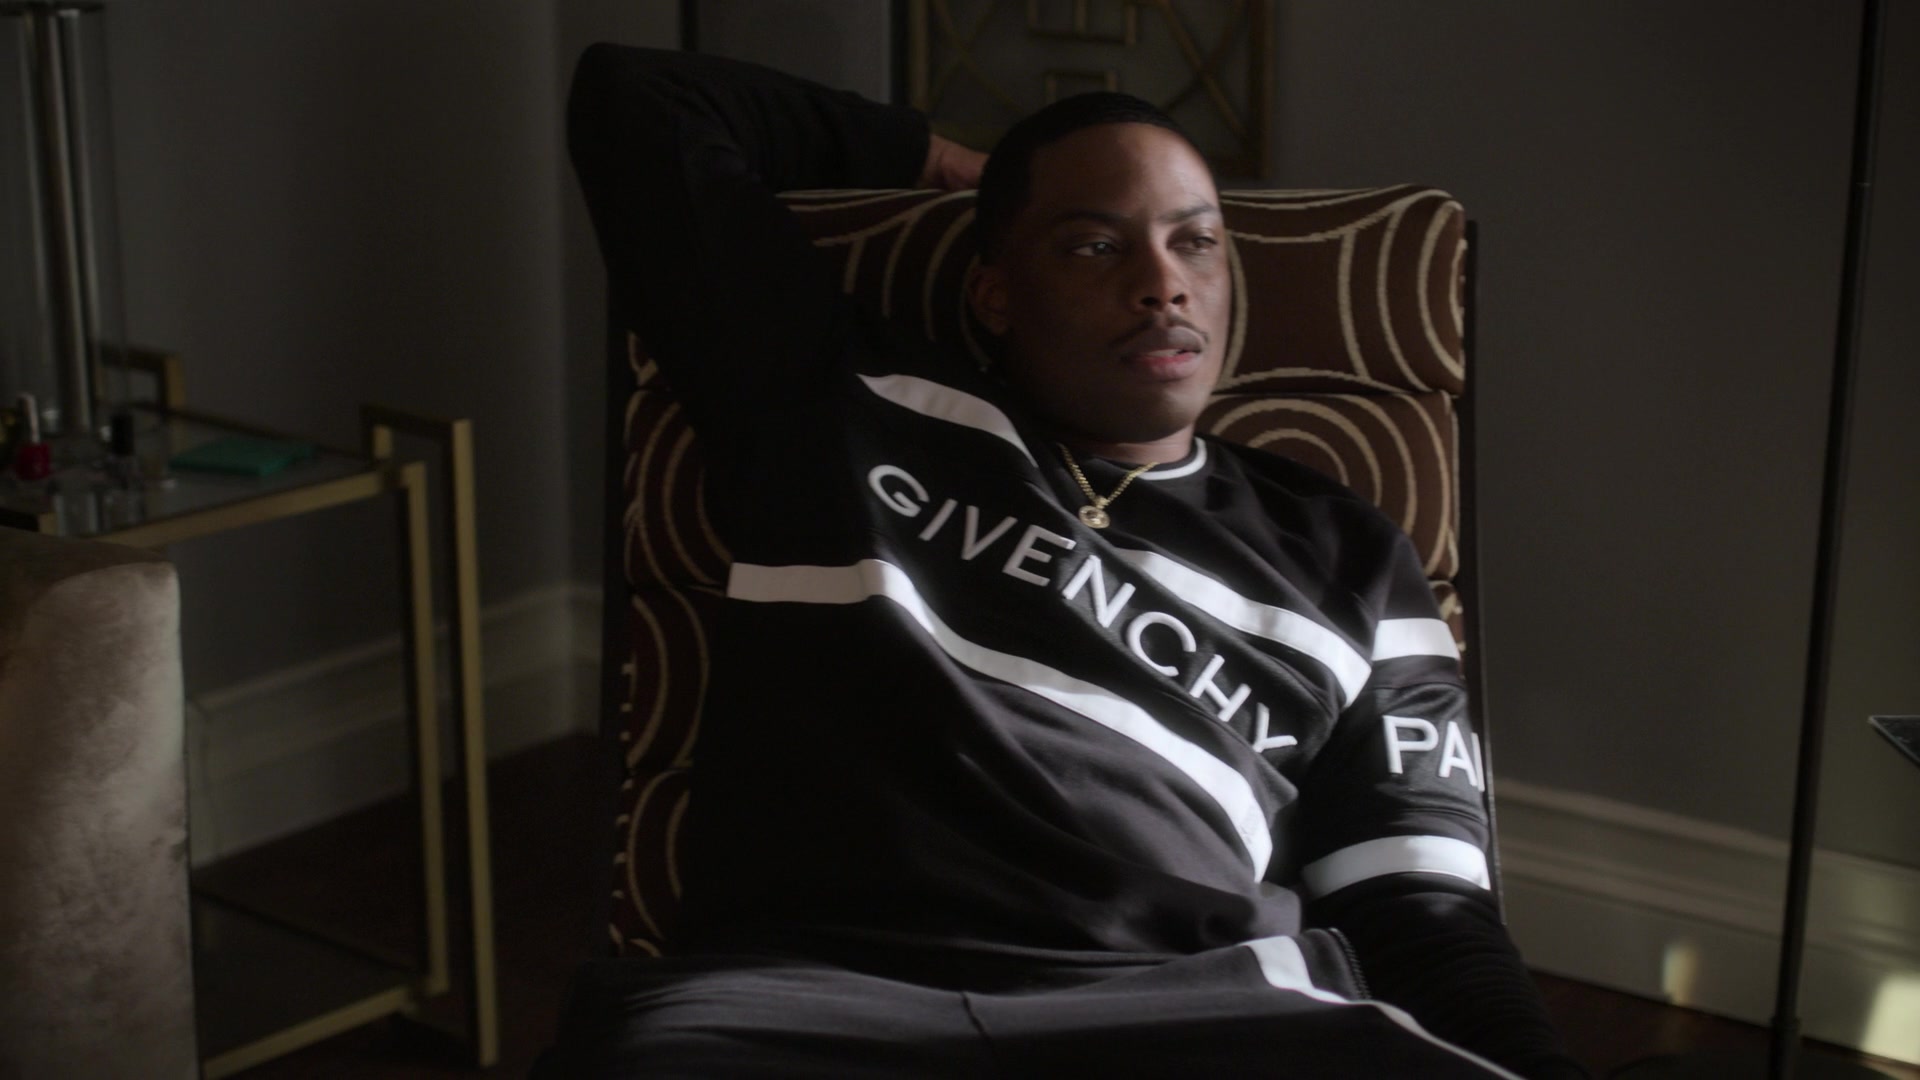 givenchy sweatsuit mens